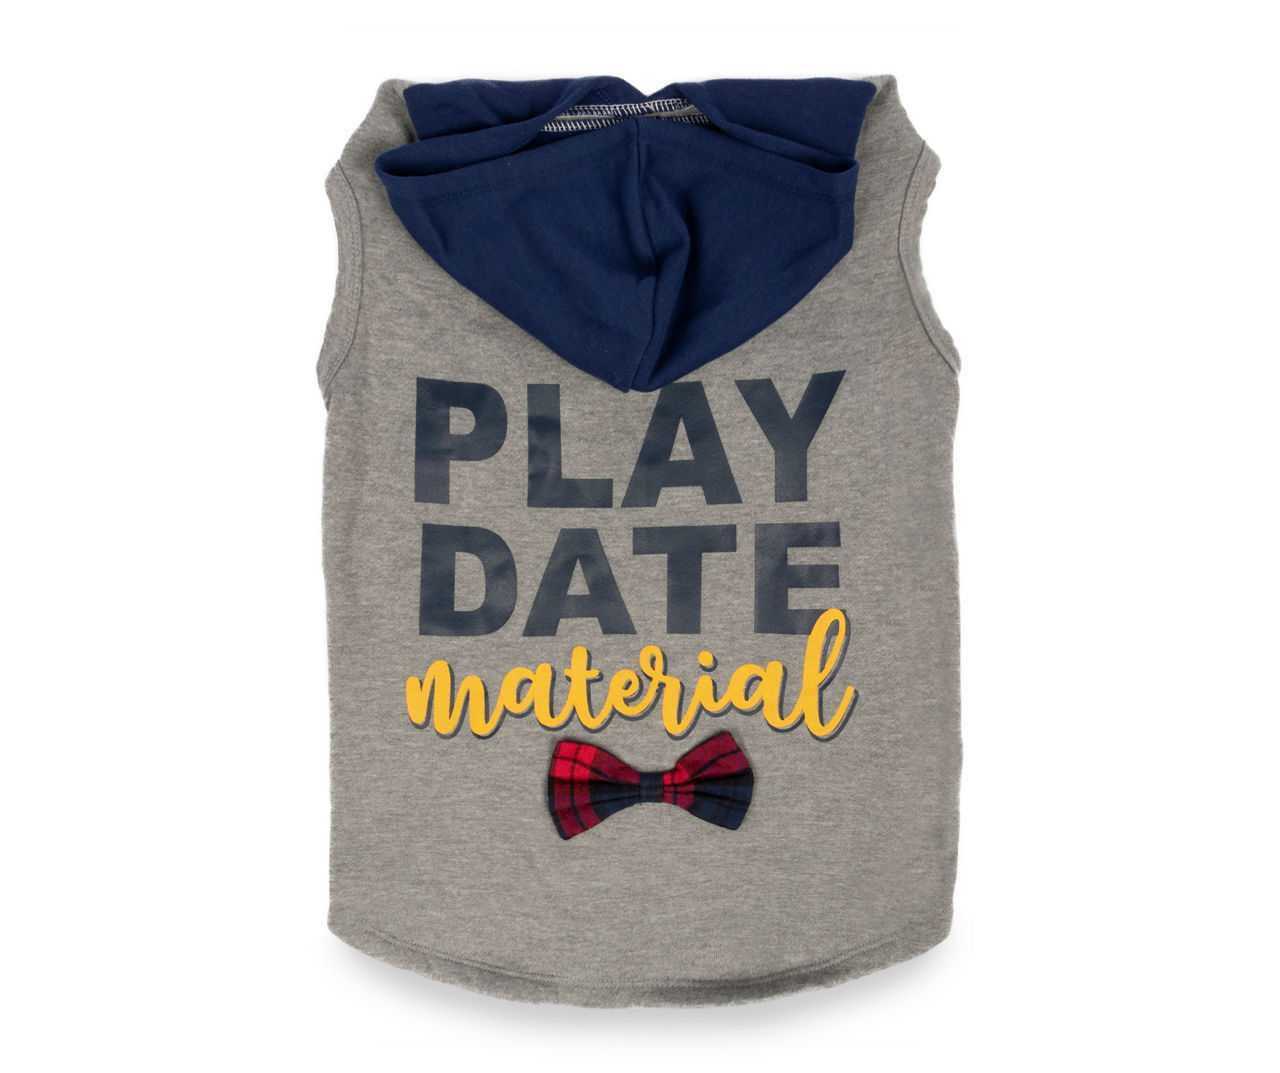 "Play Date Material" Pet X-Large Gray & Blue Hoodie With Plaid Bowtie